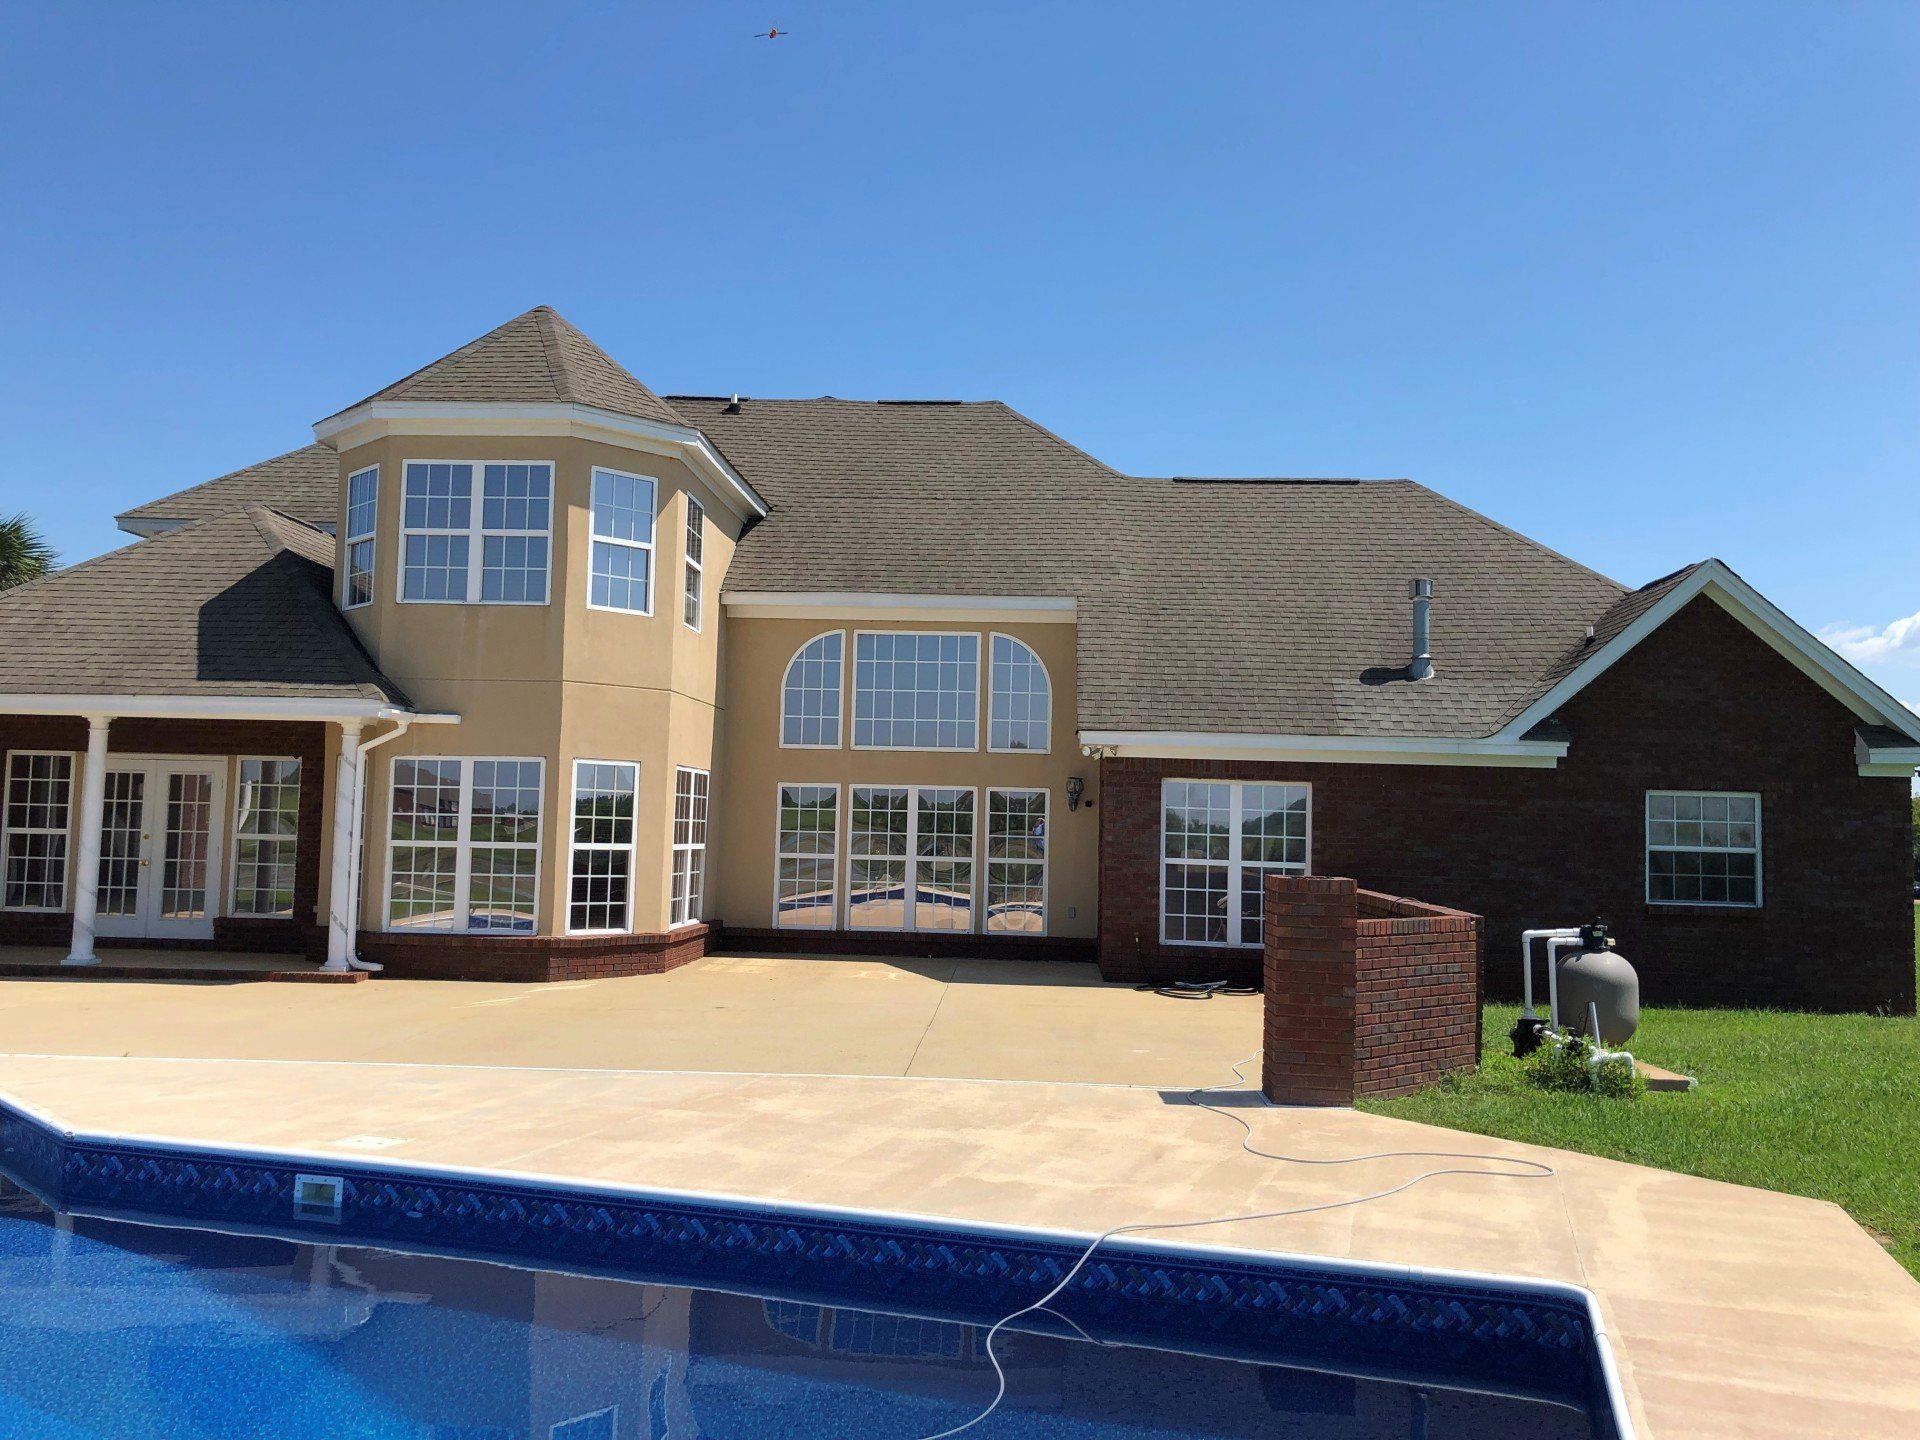 Residential tinting service in Hope Hull AL - Home window tint performed so well on the lower that the second floor was SPF Tinted a few weeks later on 9.5.2019